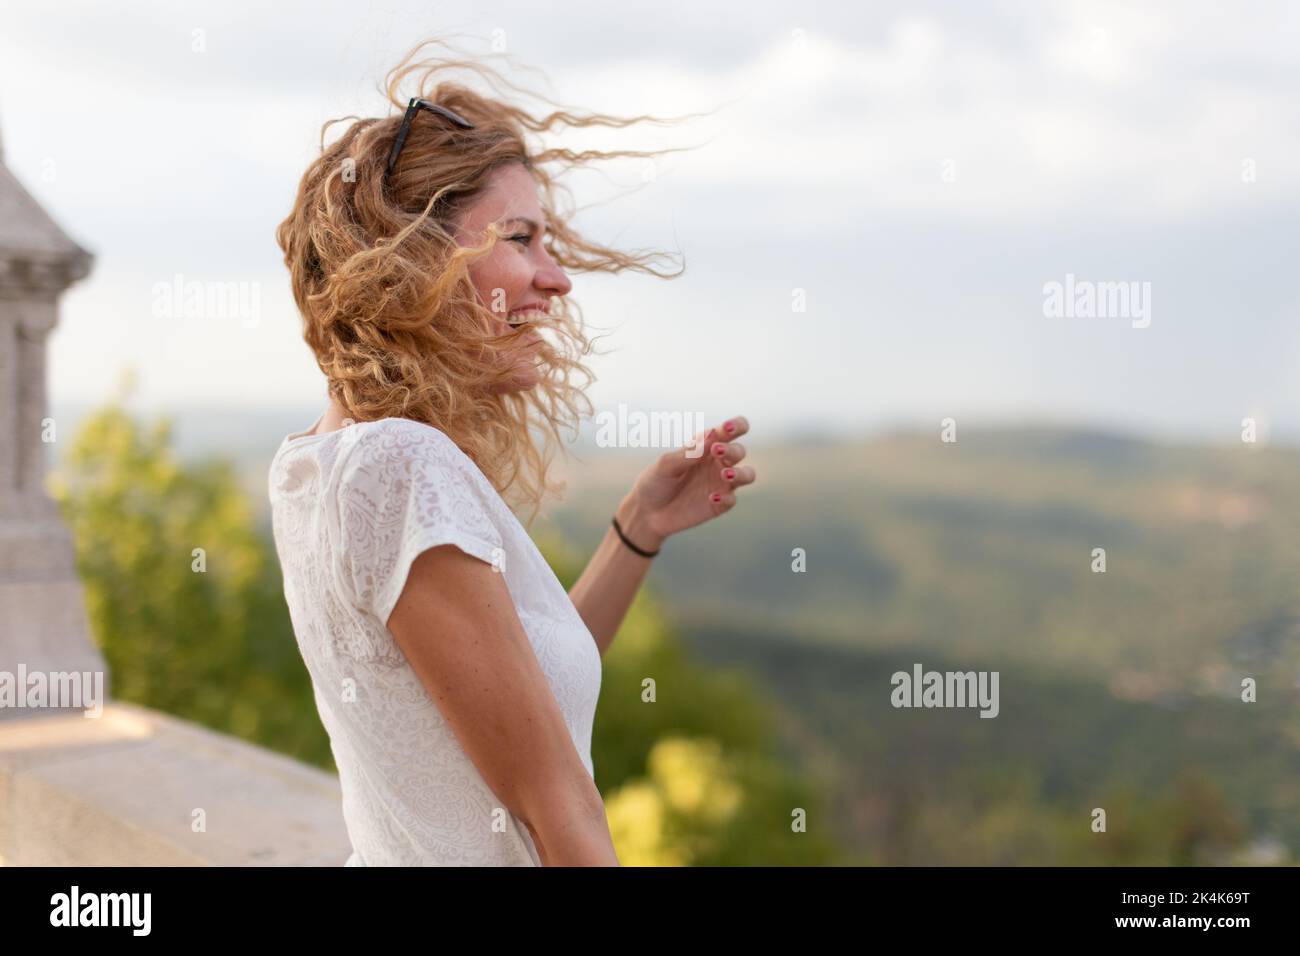 Caucasian woman with curly hair laughing outdoors profile view Stock Photo